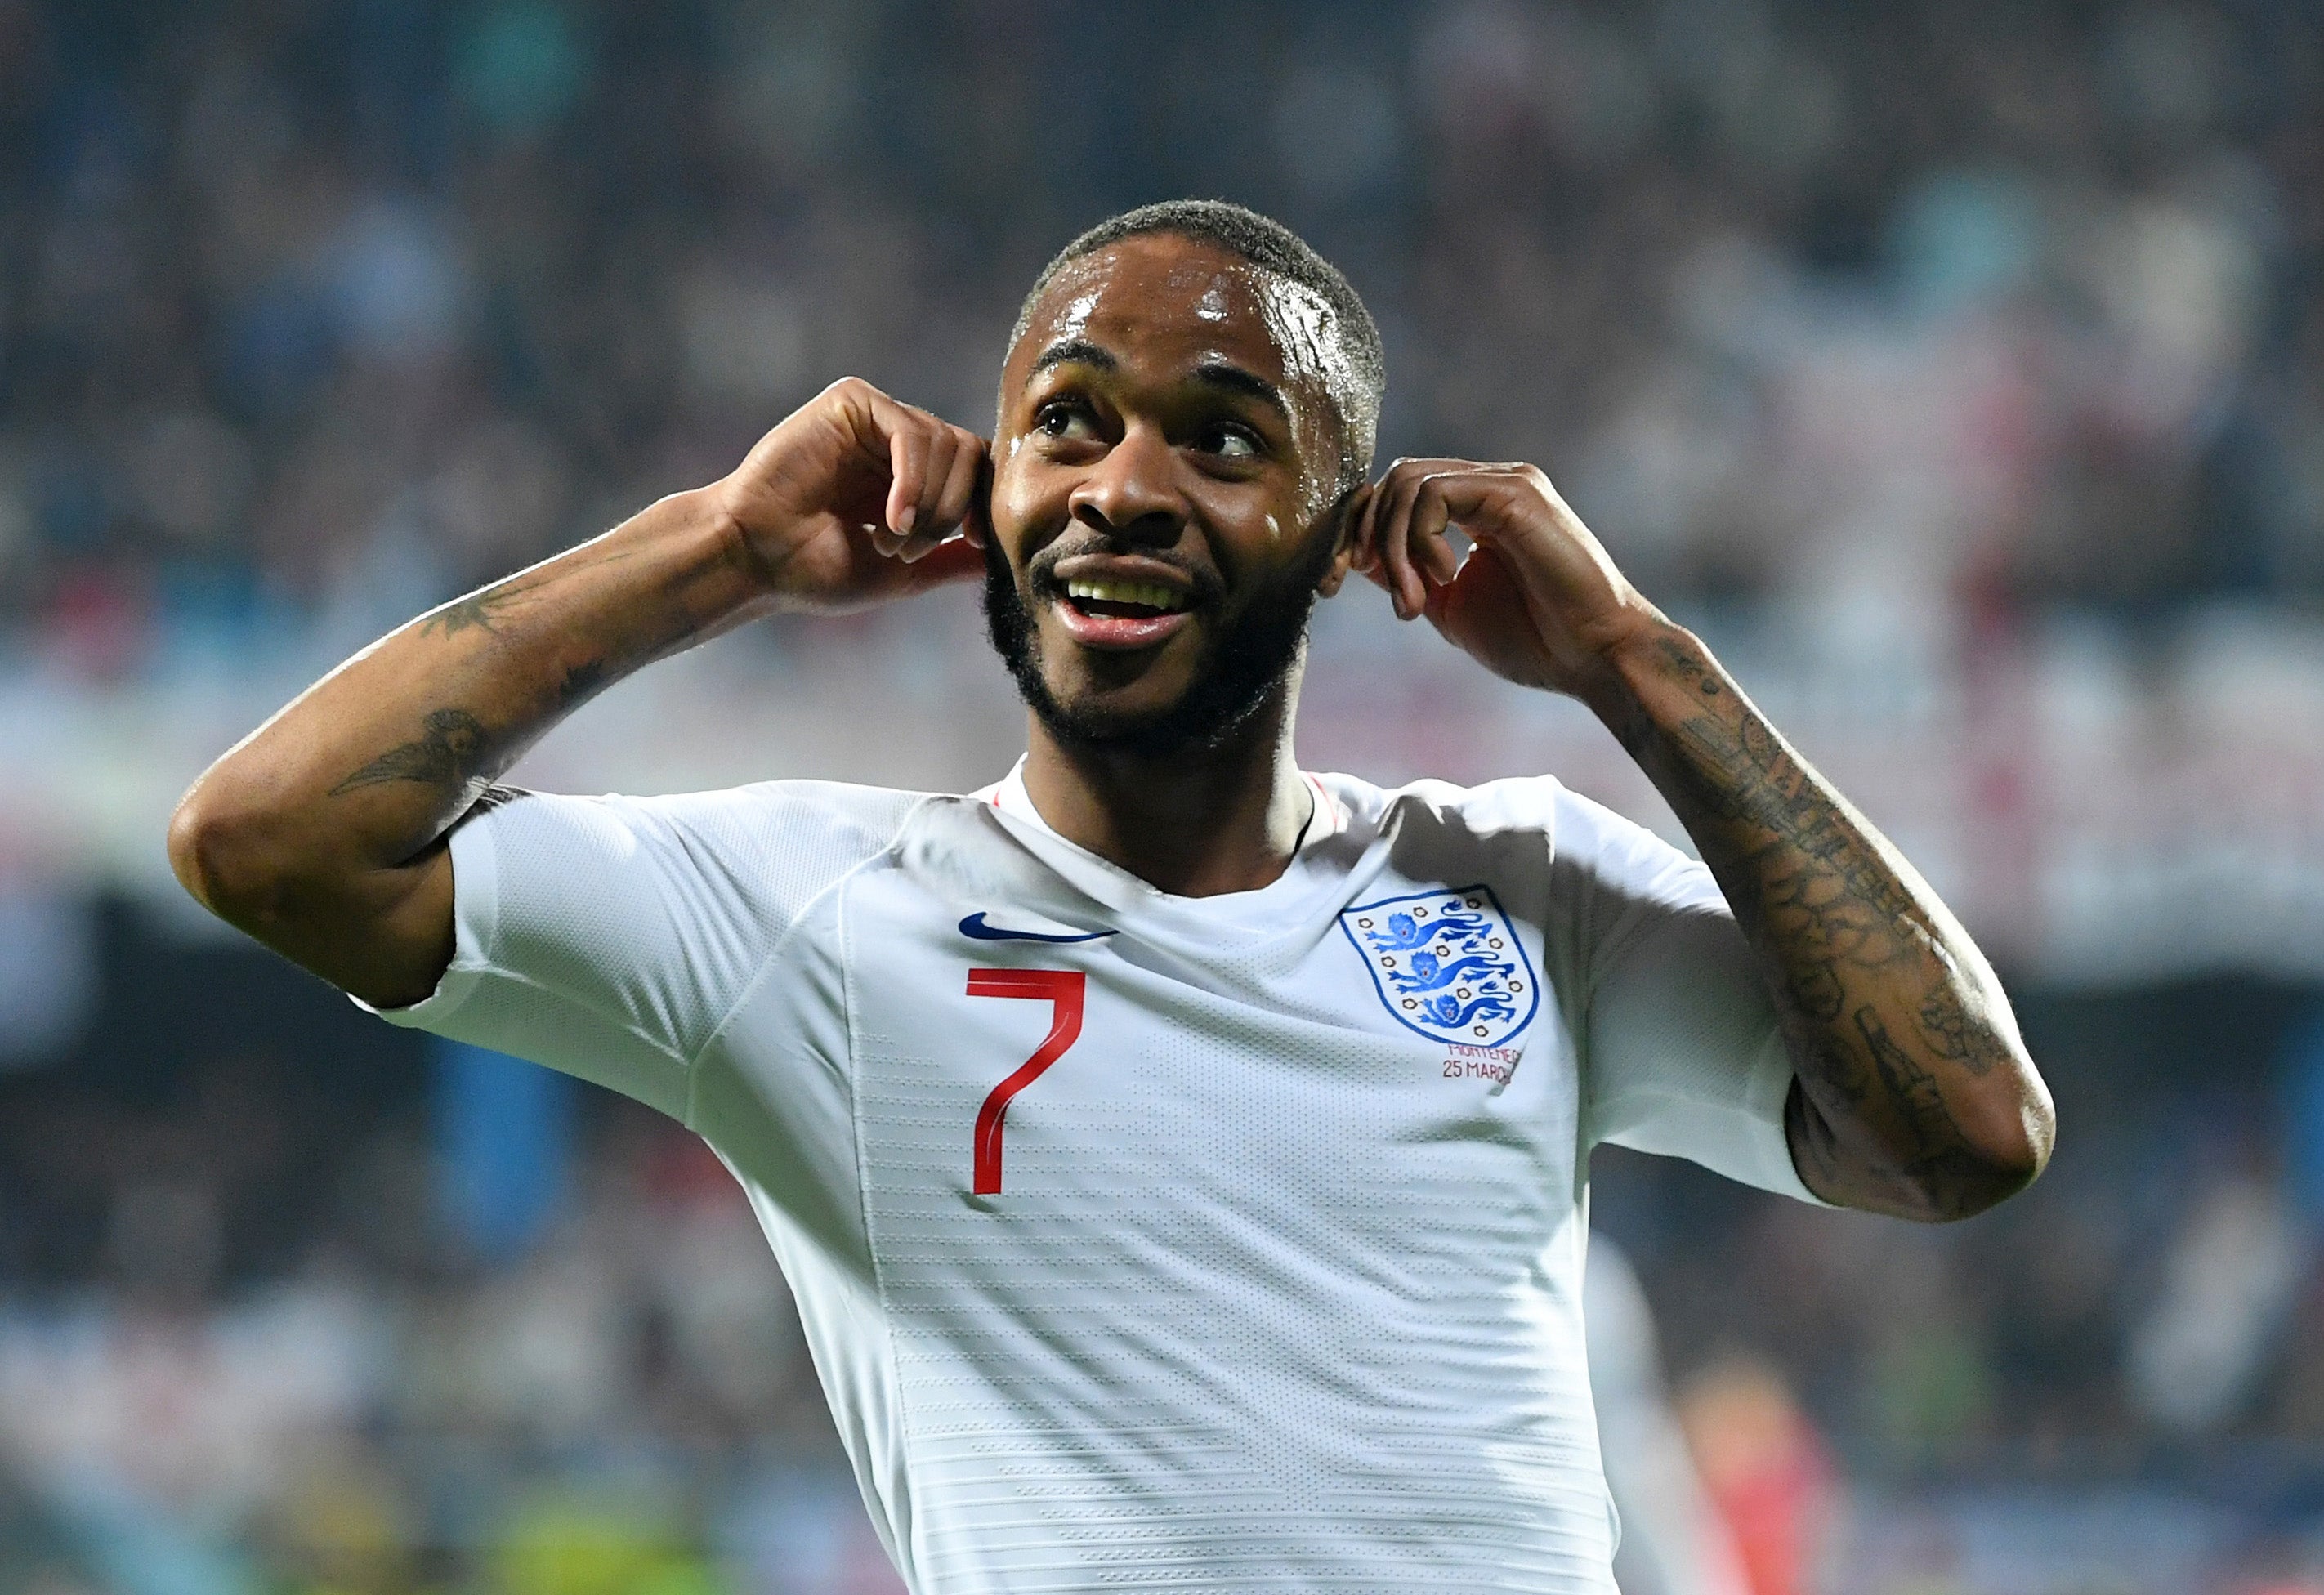 Sterling mocks racist fans after scoring England’s fifth goal during a qualifying match against Montenegro in 2019